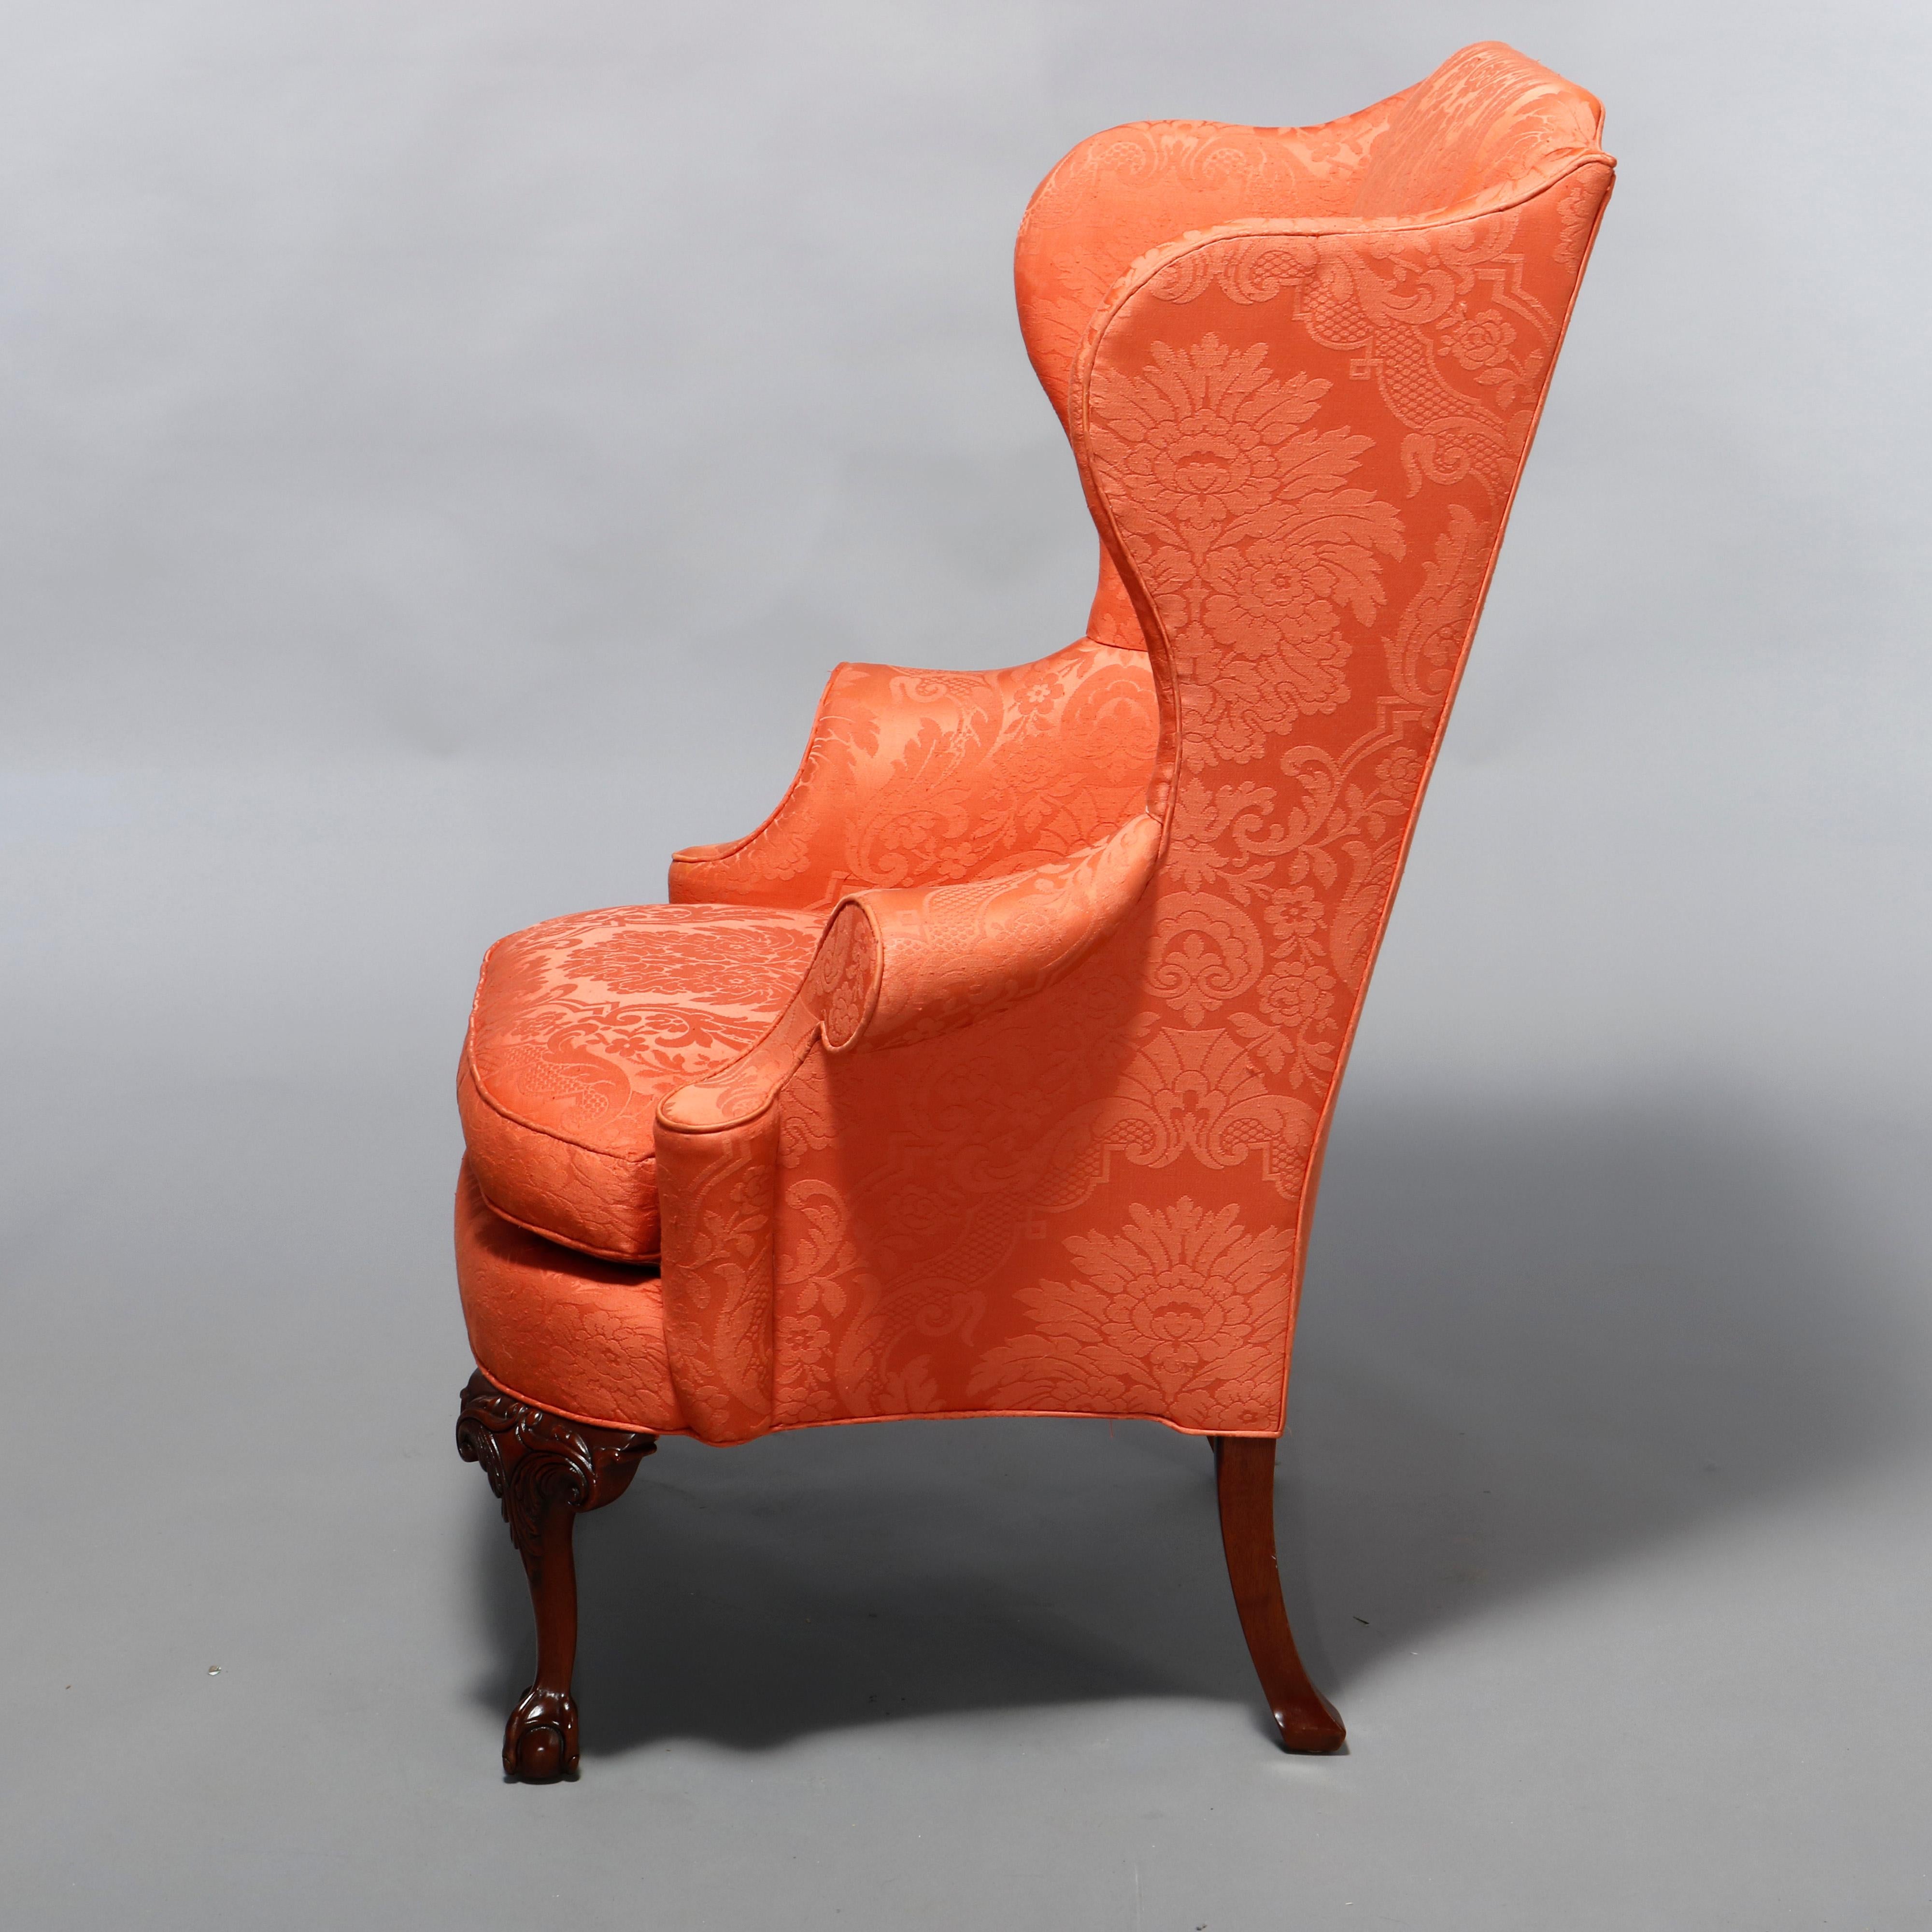 20th Century Antique Southwood Mahogany Chippendale Wing Chair with Carved Claw Foot, 20th C